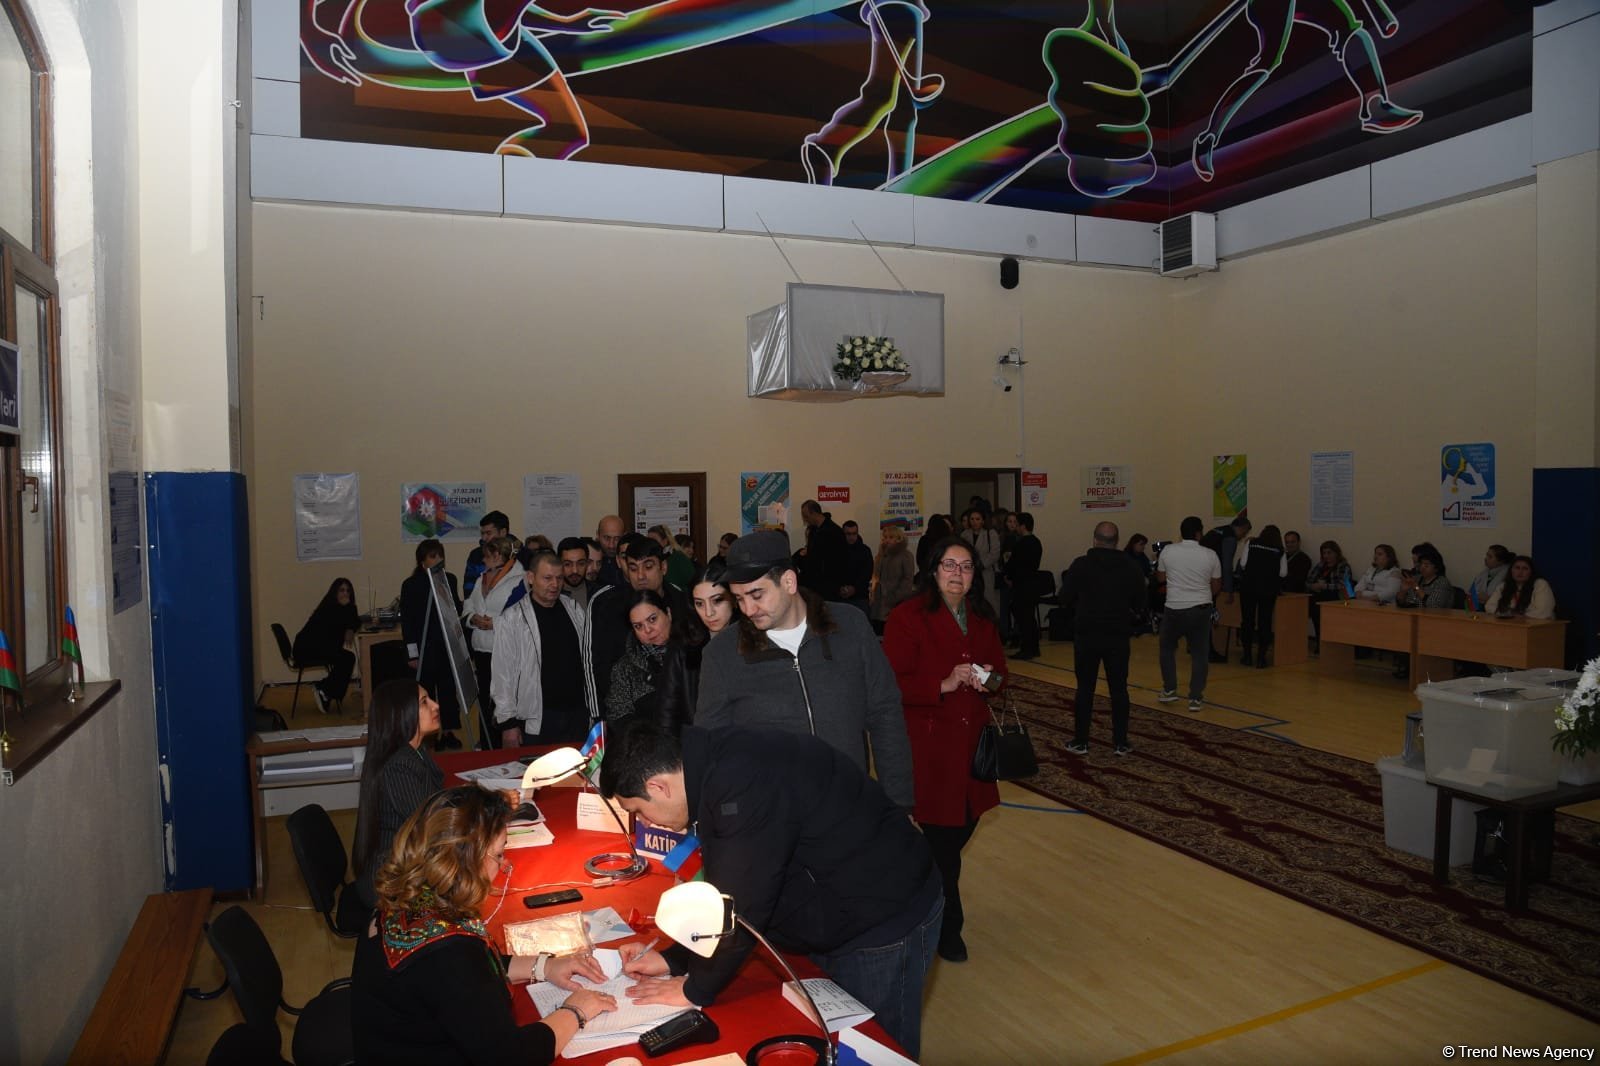 Voters flocking to polling stations established at School No. 132-134 in Baku (PHOTO/VIDEO)